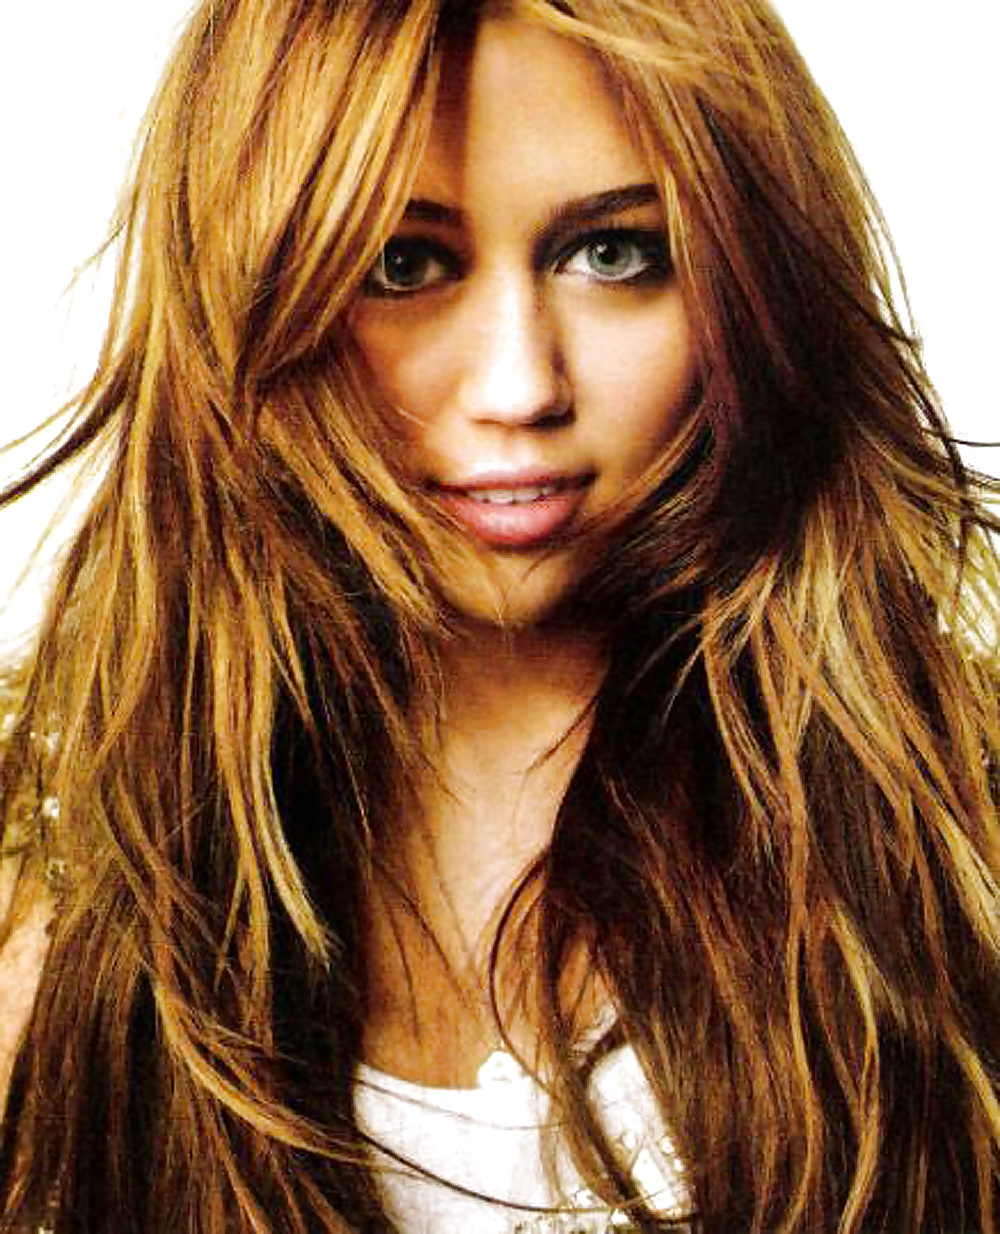 The Very Best Of Miley Cyrus #24940569